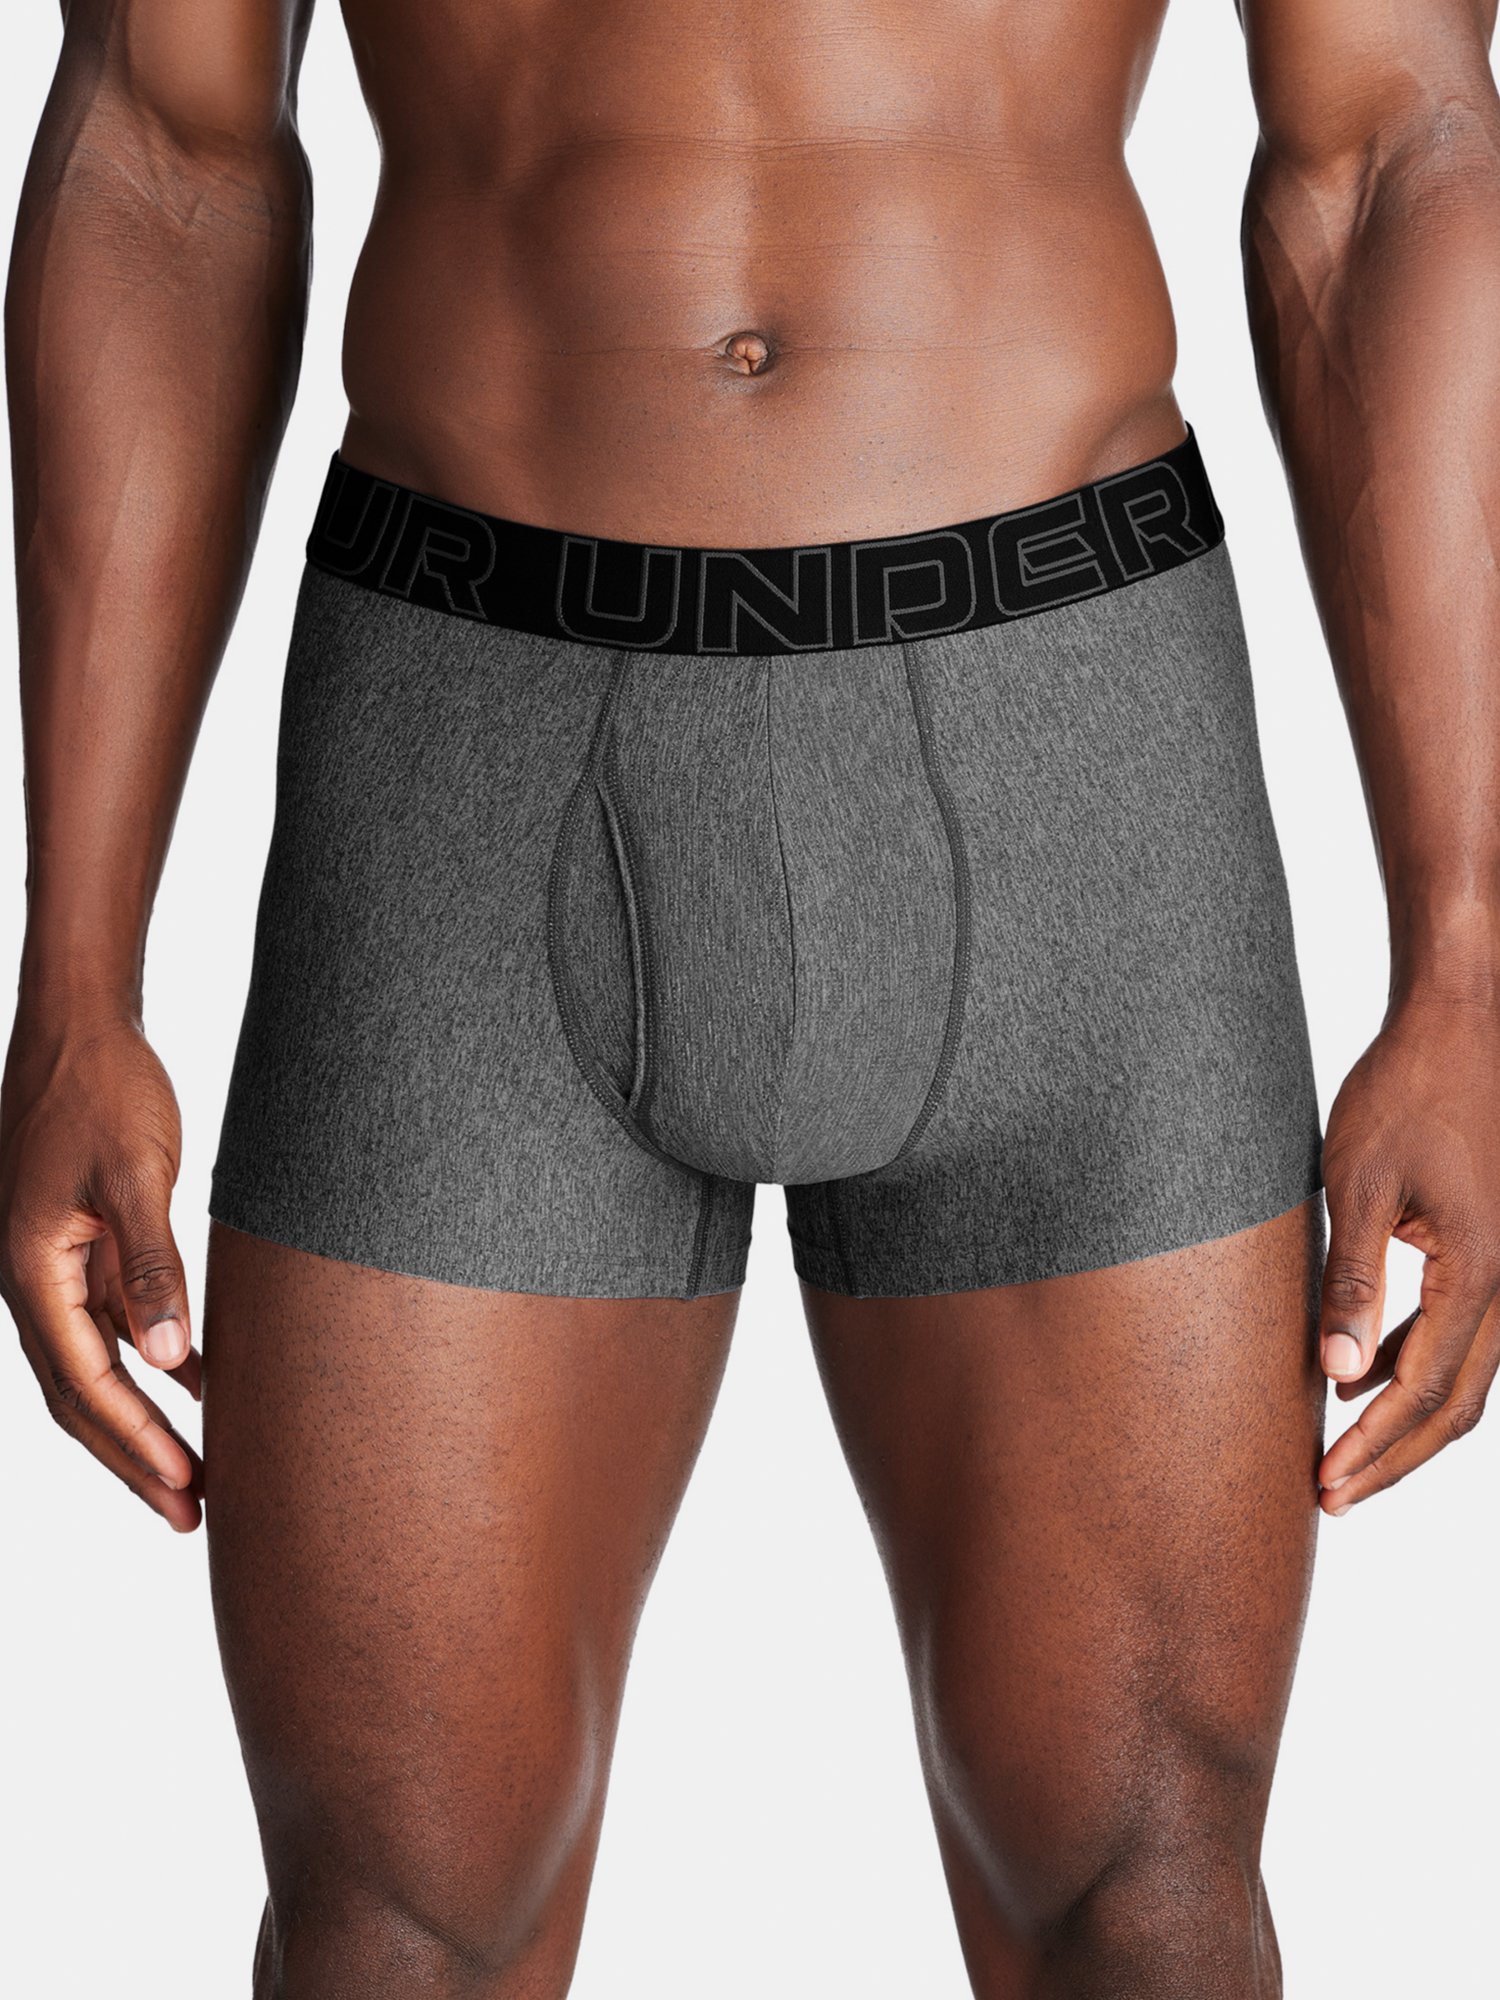 Under Armour Boxer Shorts M UA Perf Tech 3in 1PK-GRY - Men